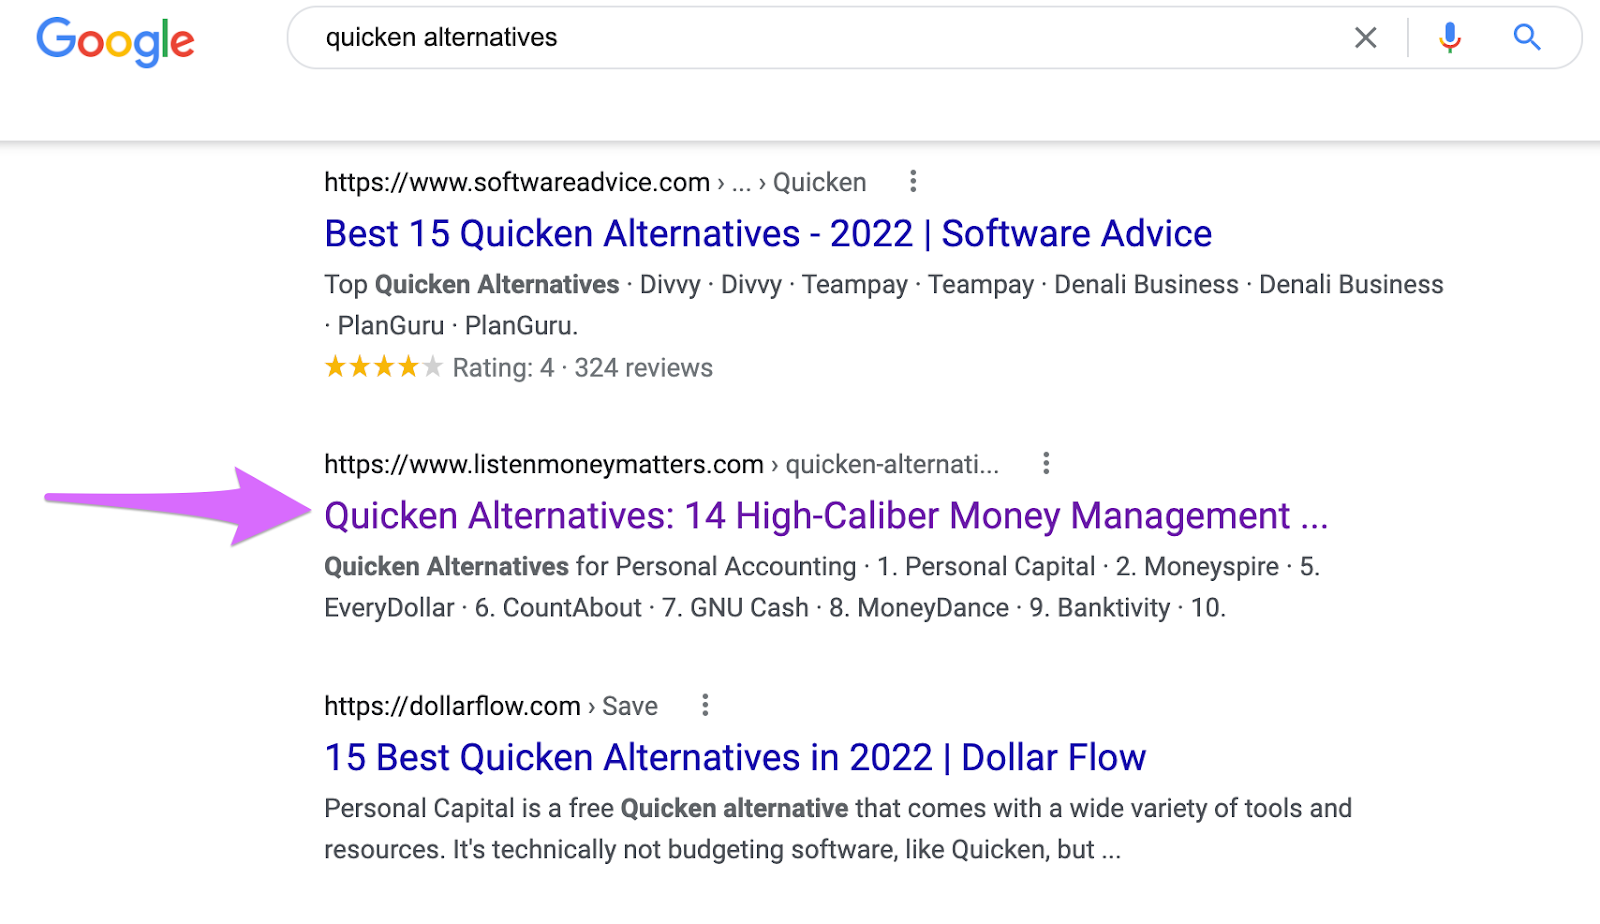 ranking for quicken alternatives in google search engine results as an affiliate marketing tip to win more search traffic